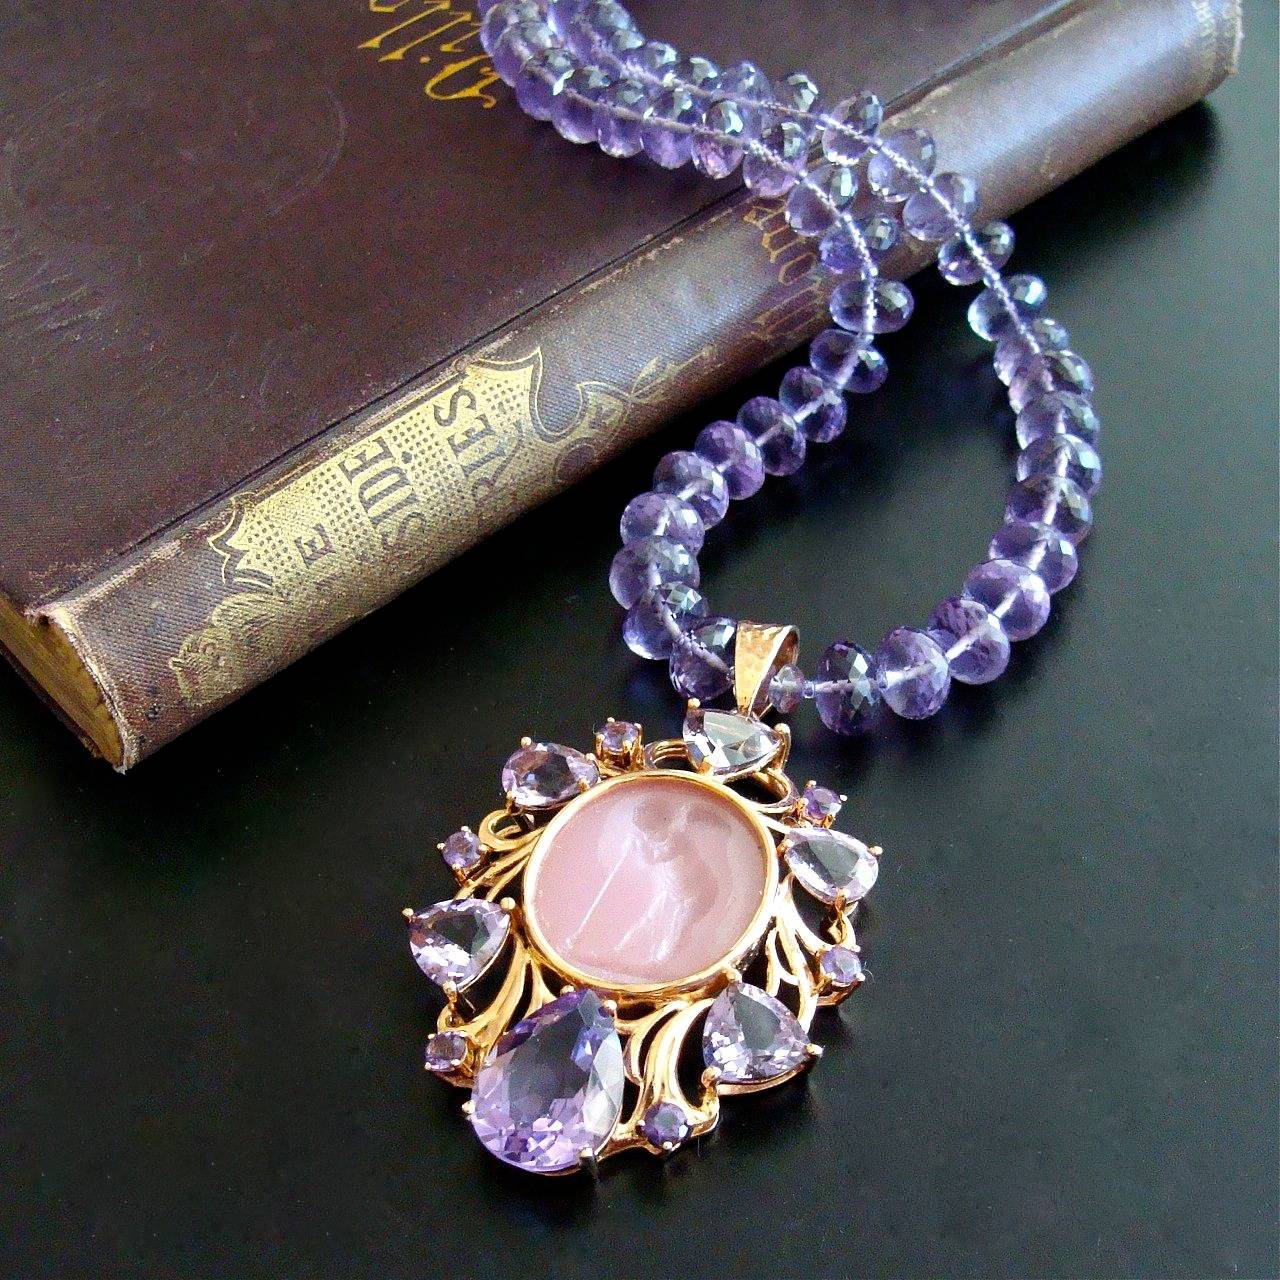 Montepulciano Choker Necklace.

A choker style necklace of sparkling micro faceted amethyst rondelles is the elegant backdrop for this remarkable Venetian glass intaglio pendant choker necklace.  The setting of the pendant consists of multiple